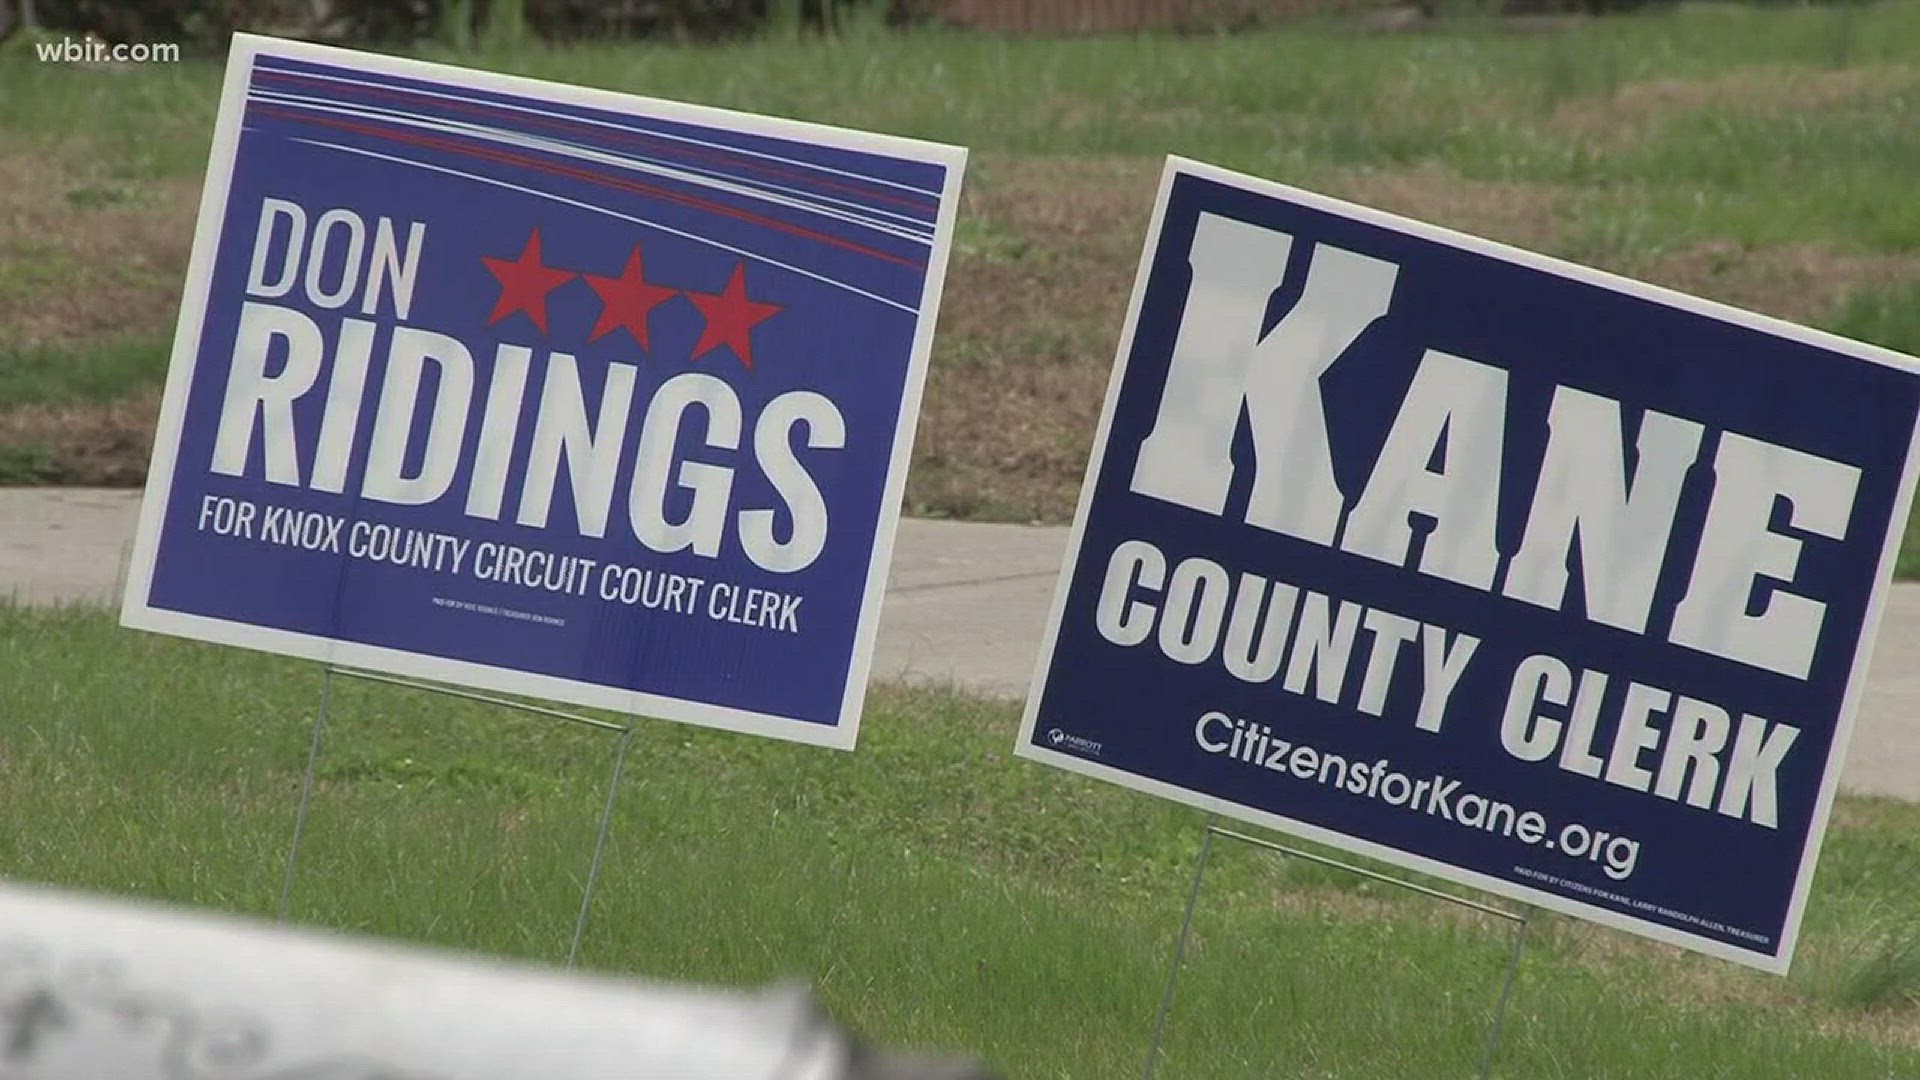 March 5, 2018: A homeowners association in Knox County is admitting it was wrong after telling homeowners to take down political signs.